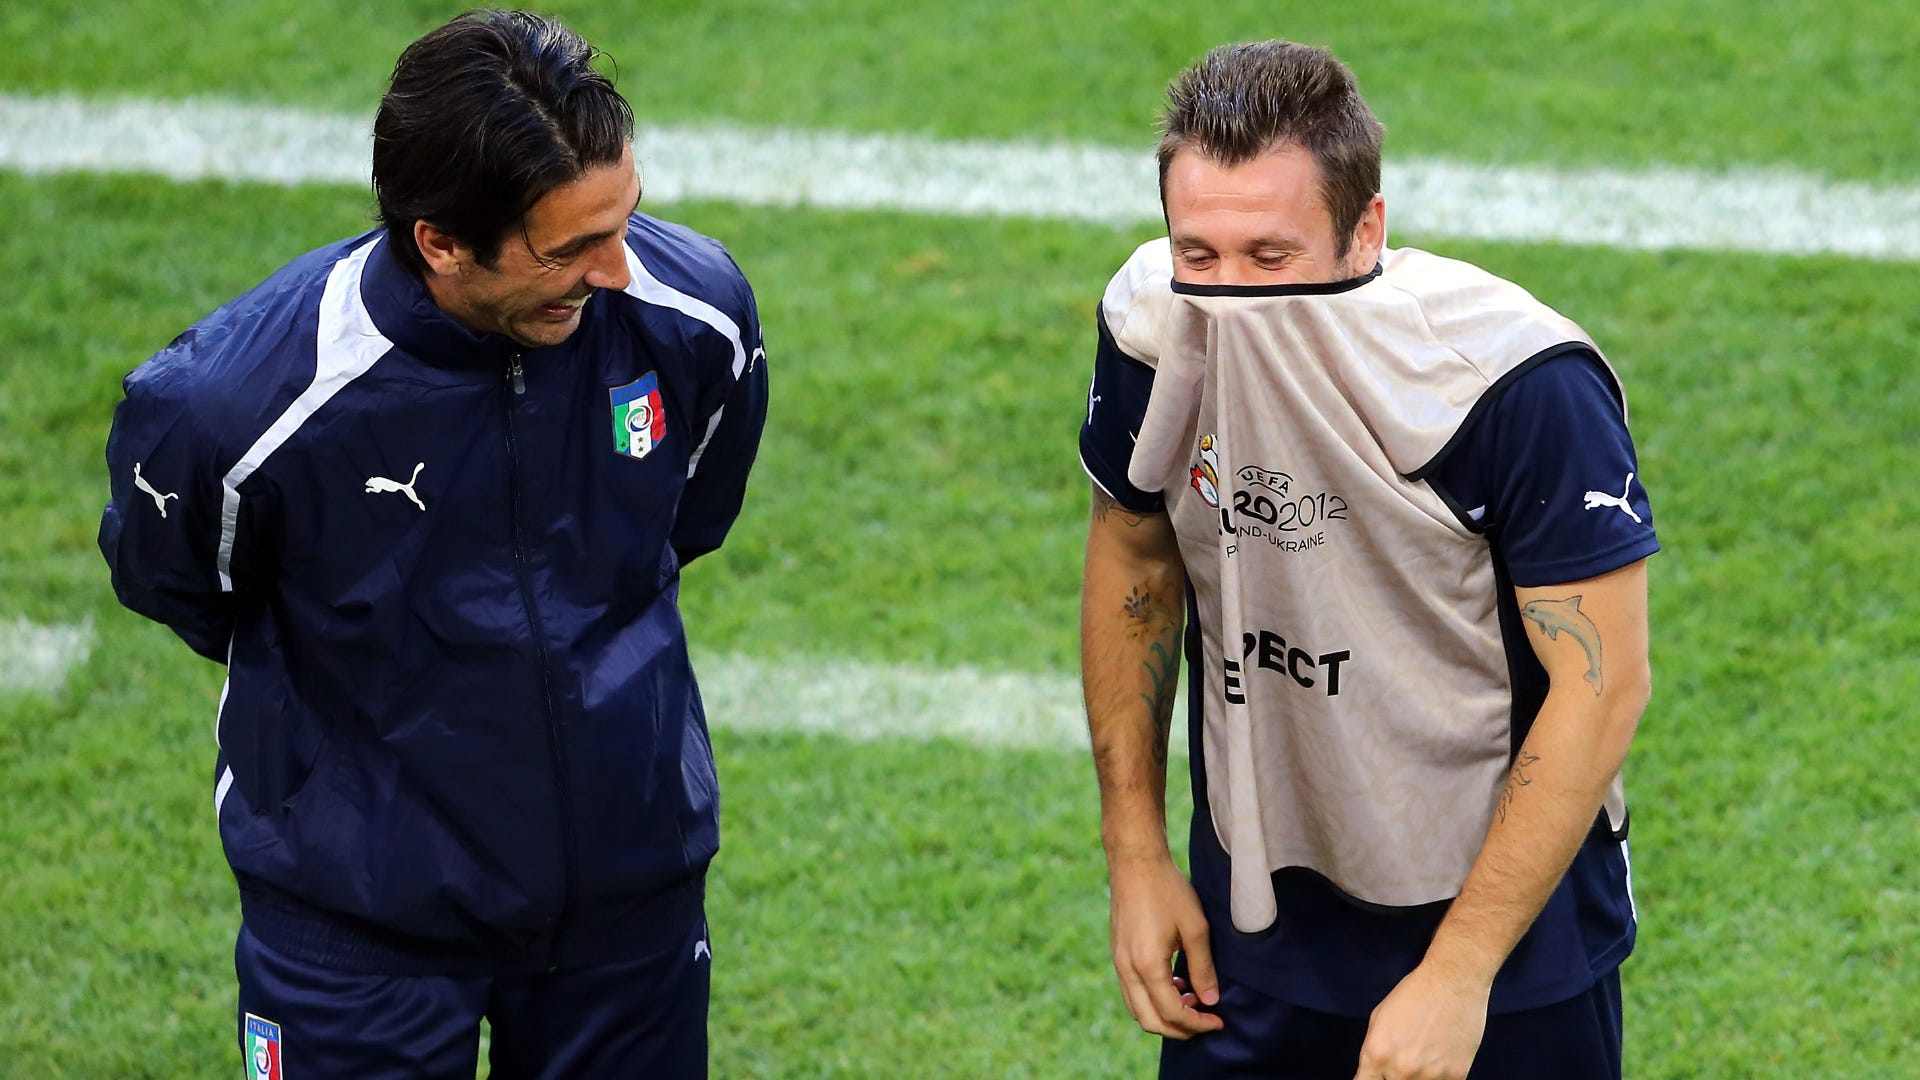 Buffon and Cassano at Juventus: “We tried, it would have been good for him”